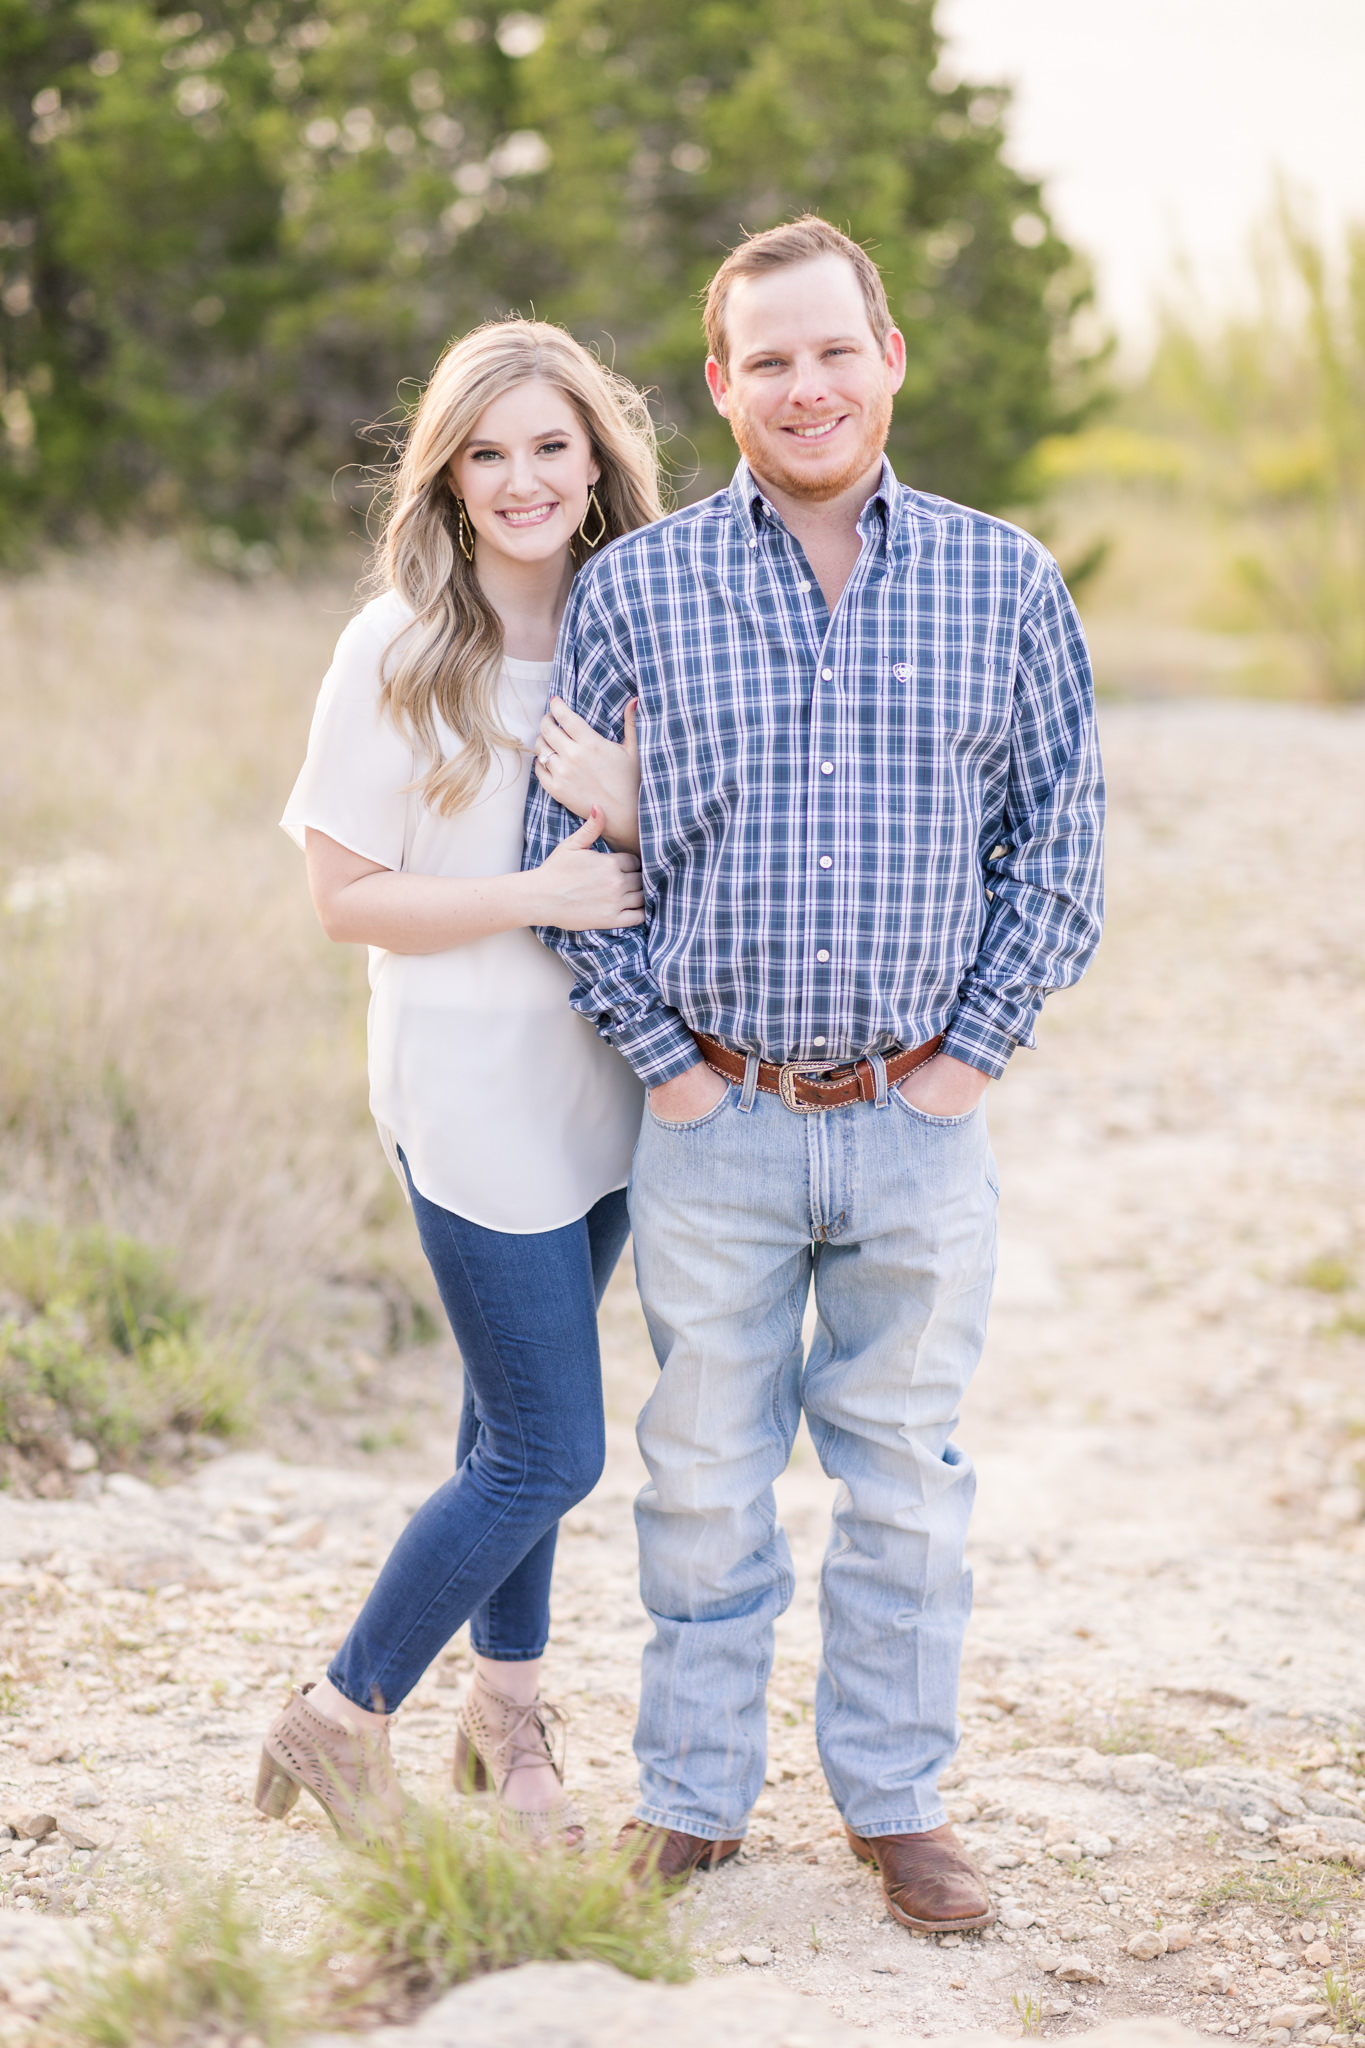 A Springtime Engagement Session at Overlook Park in Canyon Lake, TX by Dawn Elizabeth Studios, San Antonio Wedding photographer